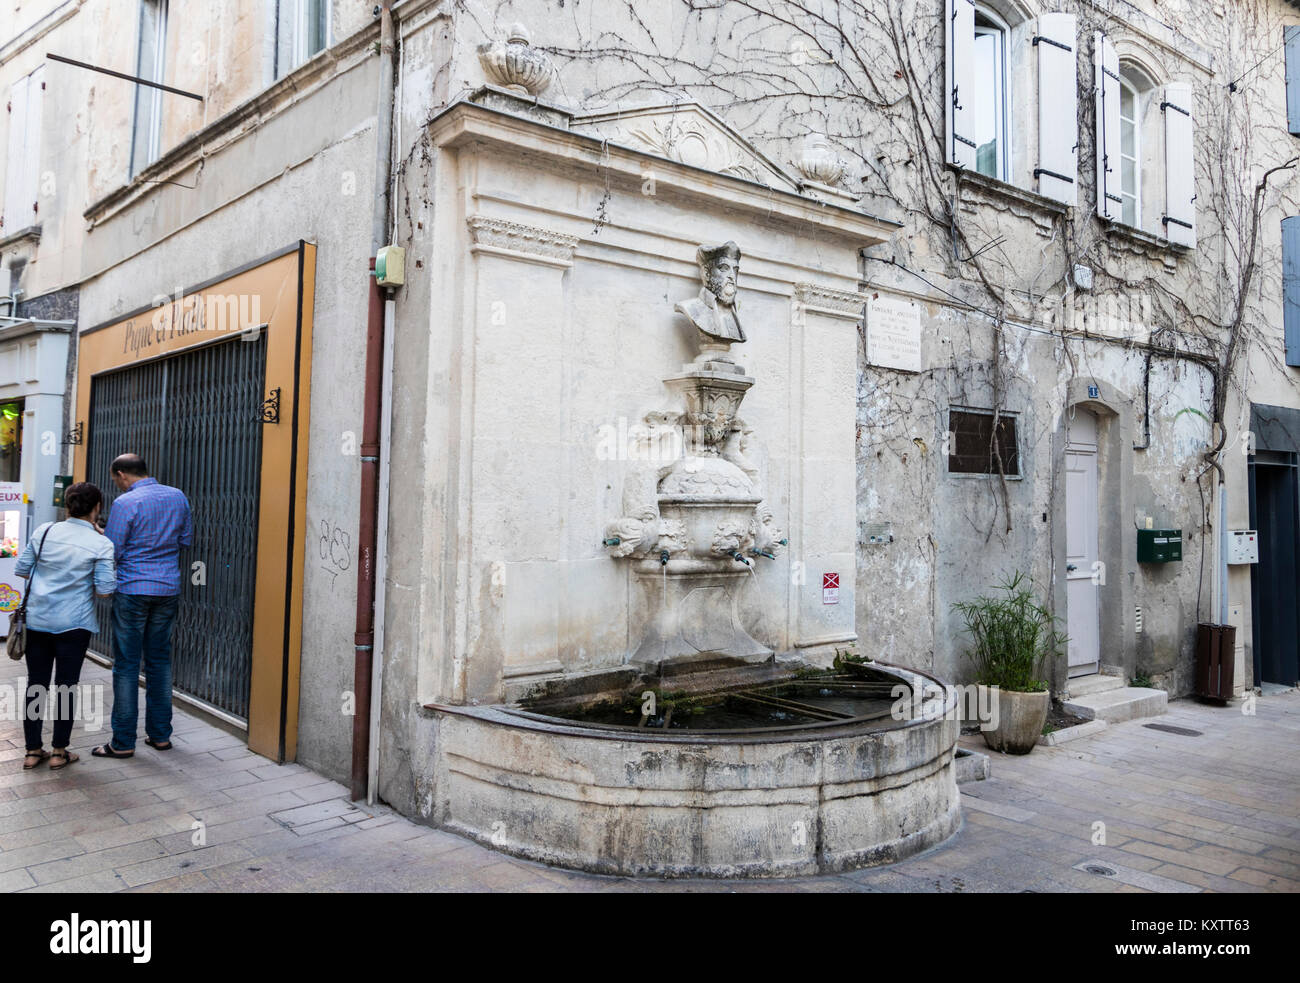 Water fountain with a bust of Michel de Nostradame or Nostradamus in the Old Town of his hometown and birthplace of Saint-Remy-de-Provence, France Stock Photo